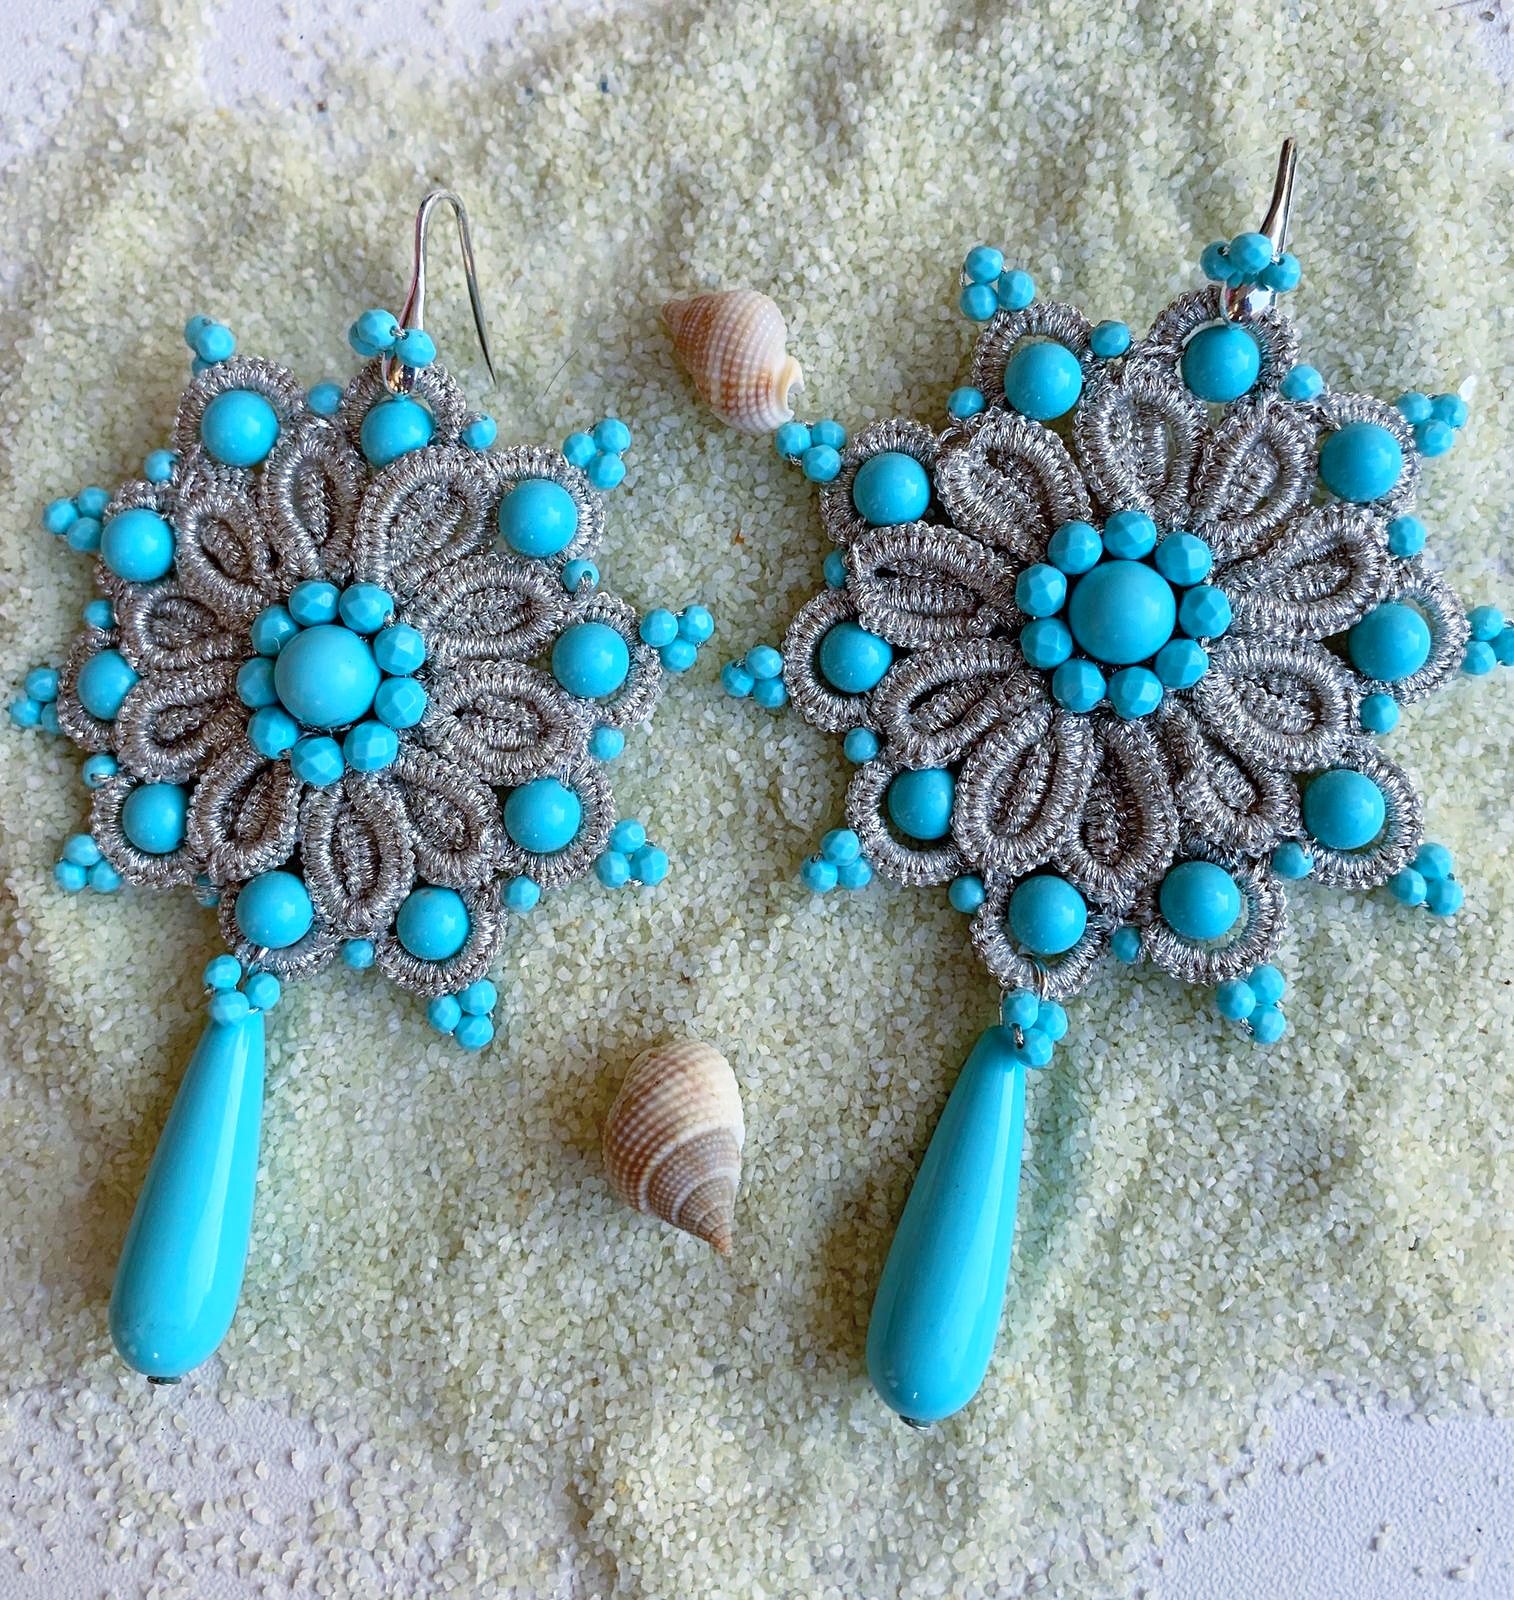 Earrings in chiaccherino lace and turquoise paste